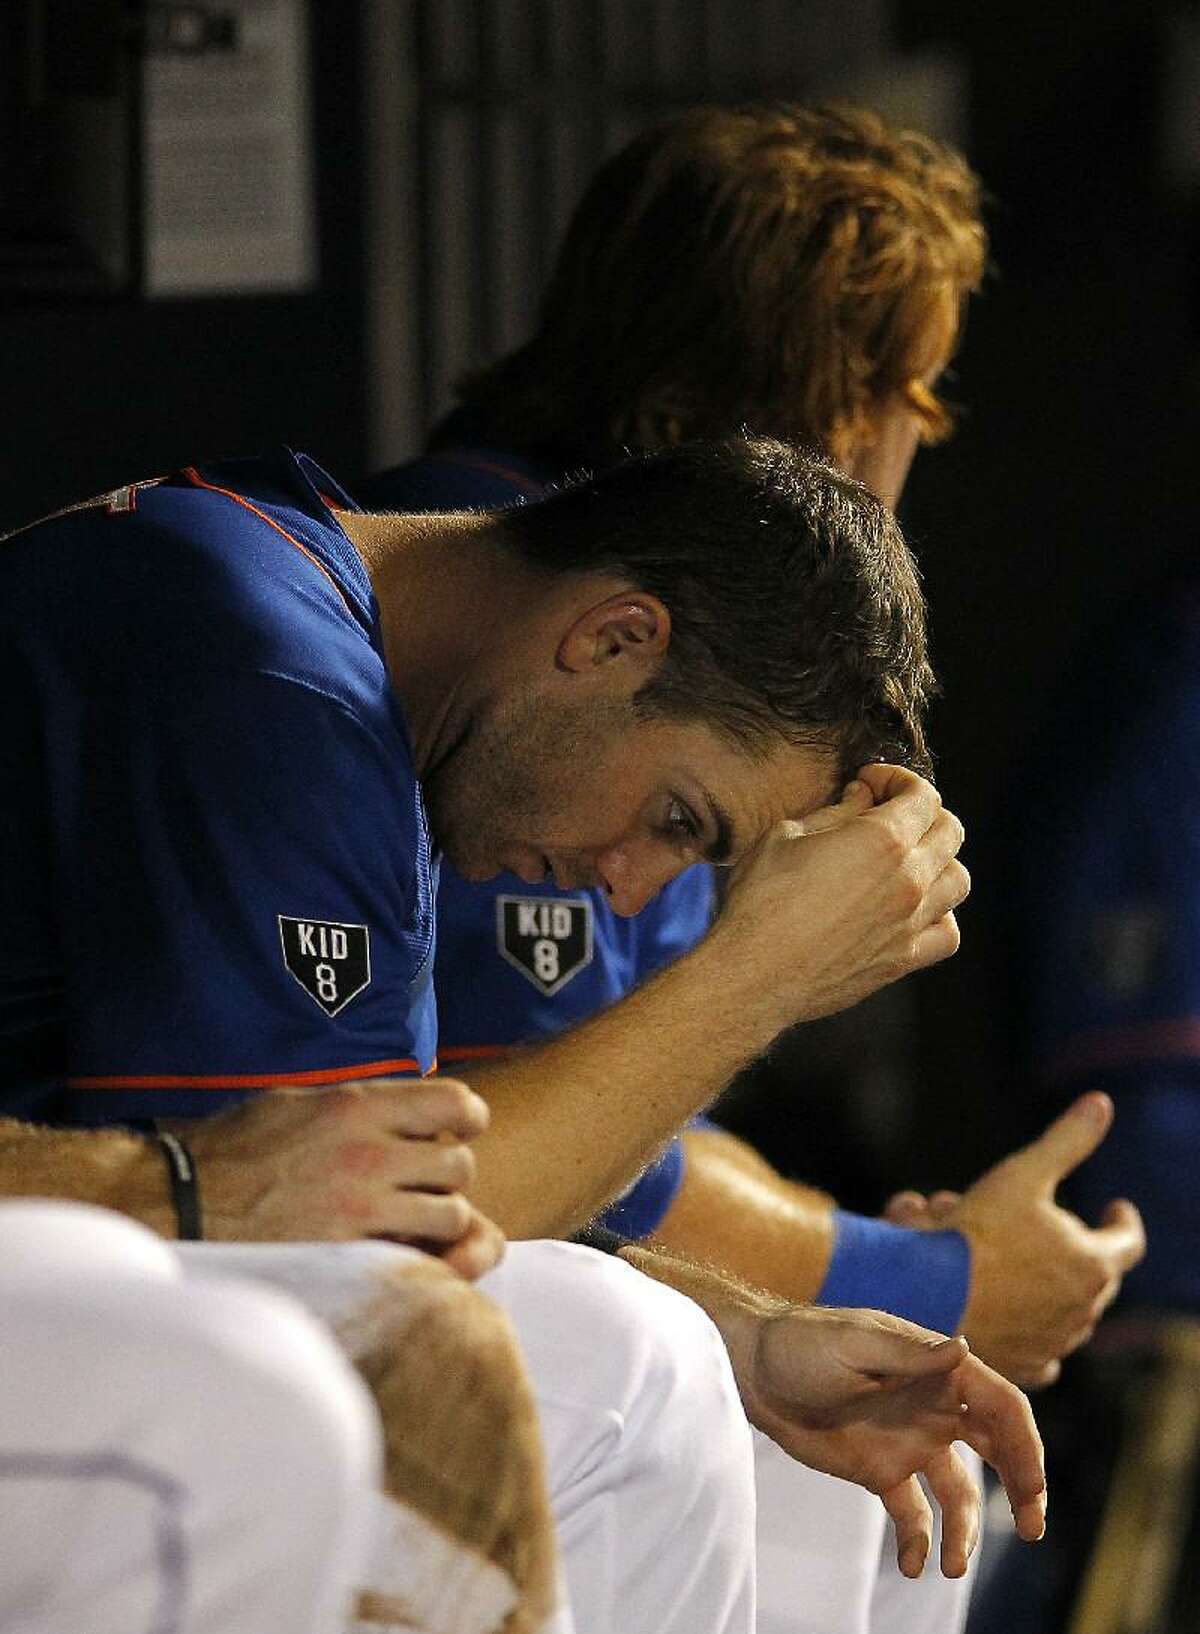 ASSOCIATED PRESS New York Mets' David Wright sits in the dugout while waiting for the final out in the ninth inning of a Mets 3-1 loss to the Houston Astros at Citi Field in New York on Friday.